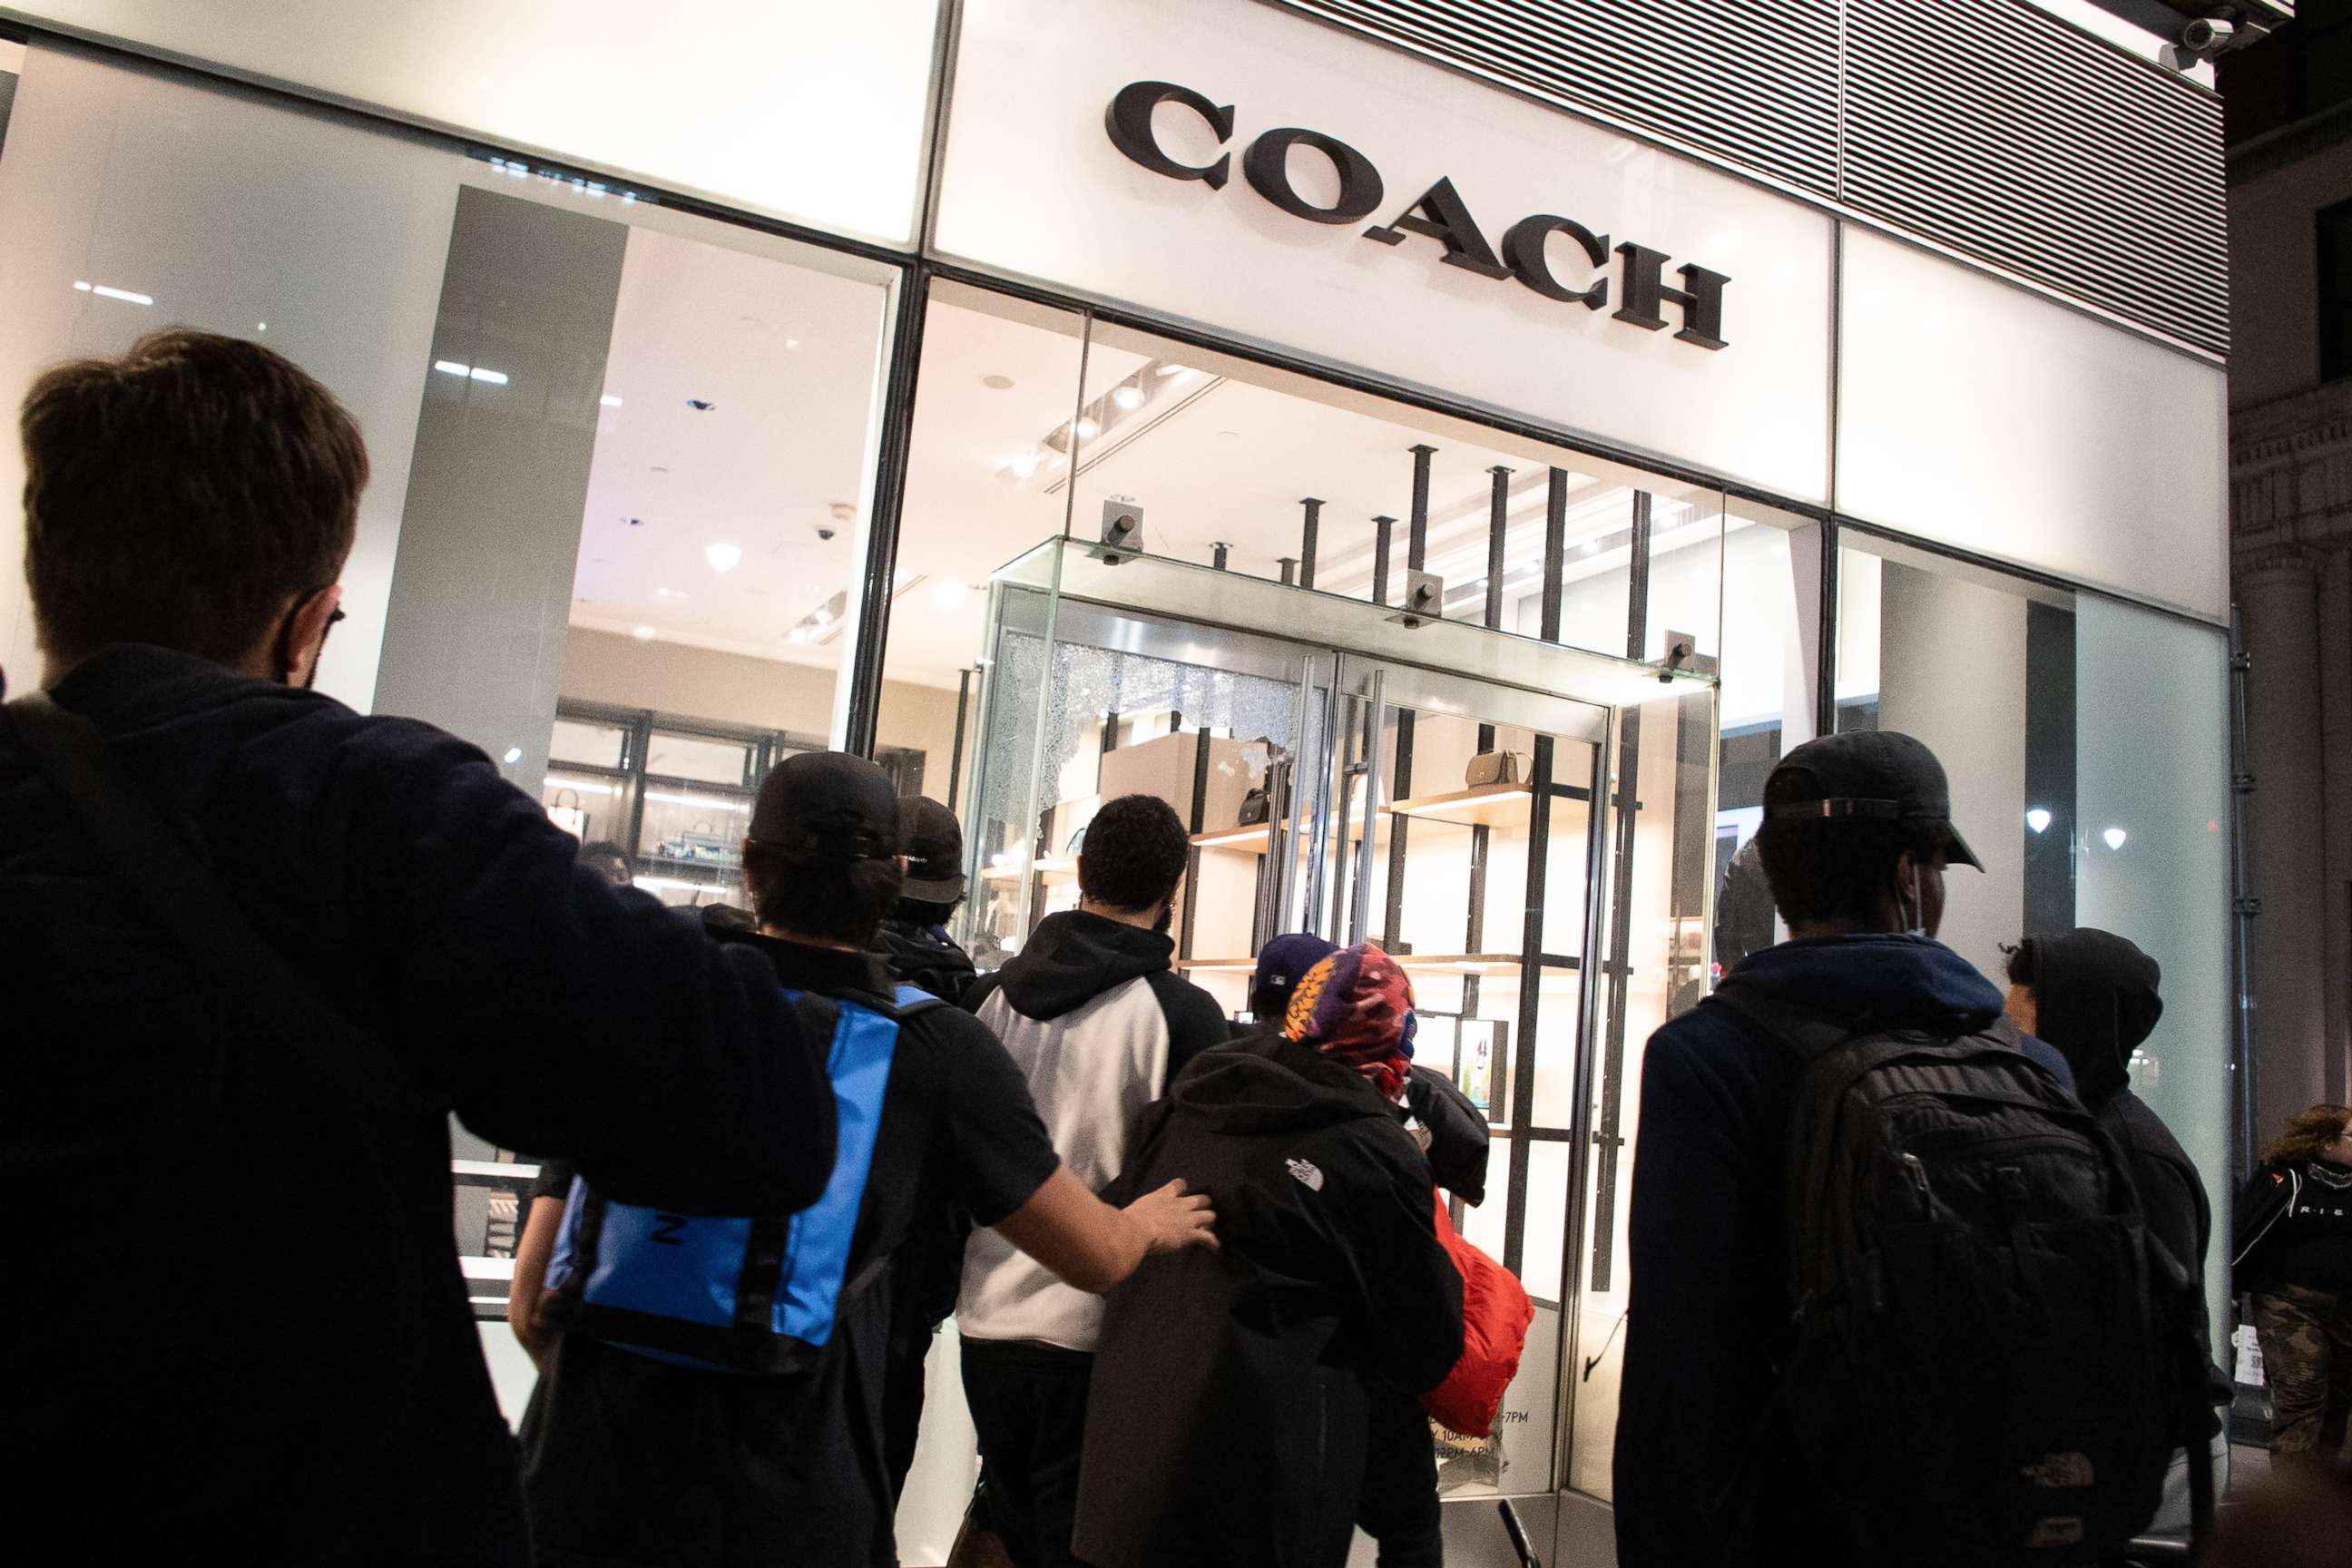 PHOTO: A group of people looting a Coach store in Manhattans 5th avenue after an anti police brutality march, May 31, 2020.